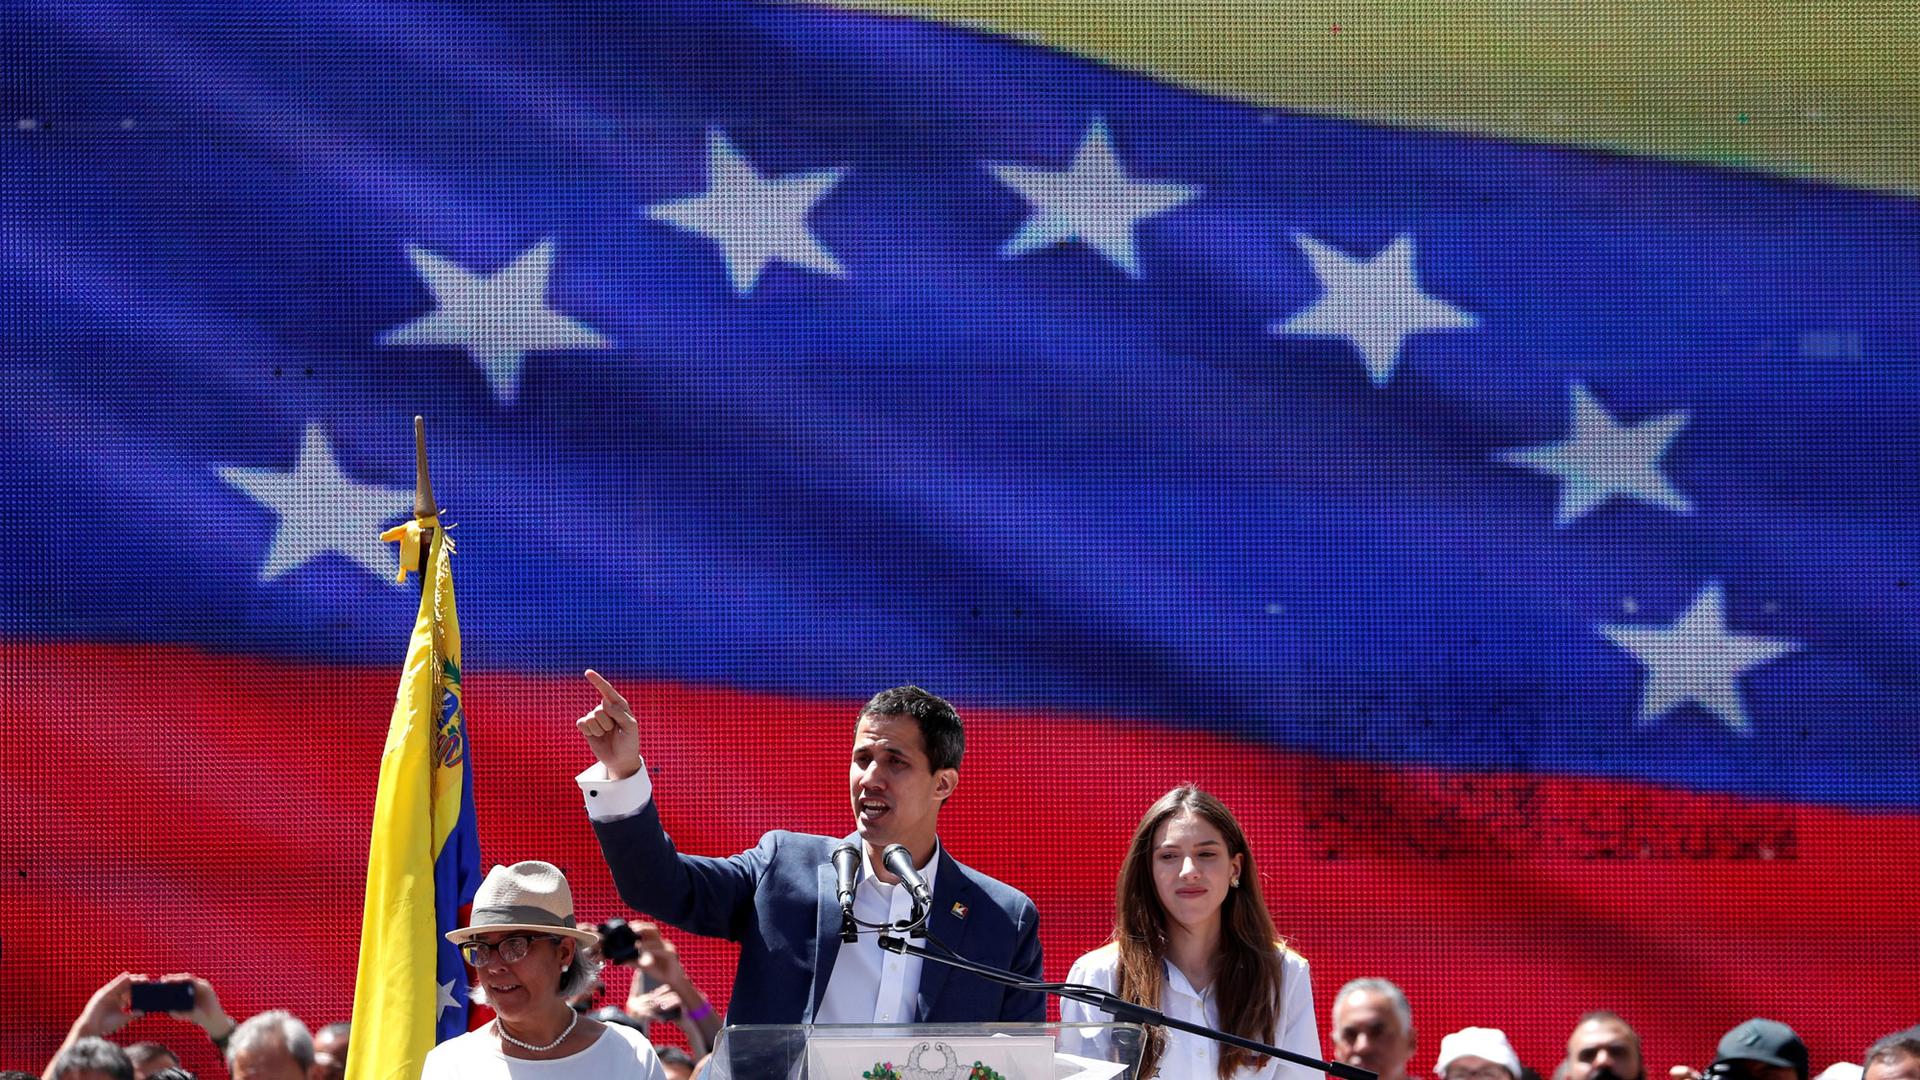 Opposition leader Juan Guaido is shown standing at a podium with a large Venezuelan flag projected behind him.